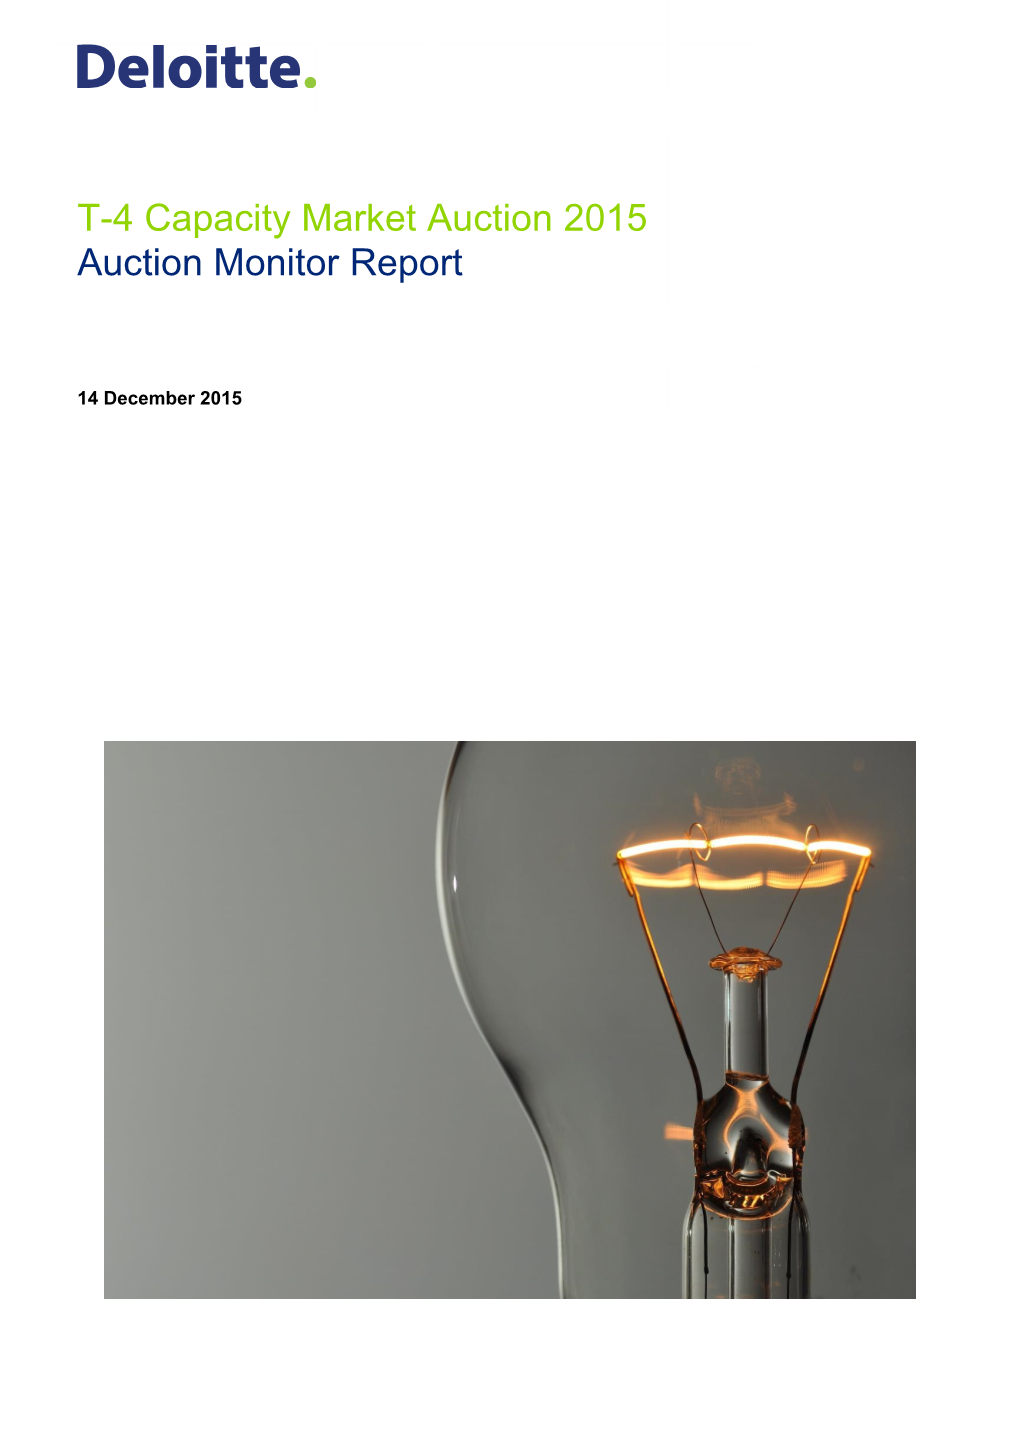 T-4 Capacity Market Auction 2015 Auction Monitor Report